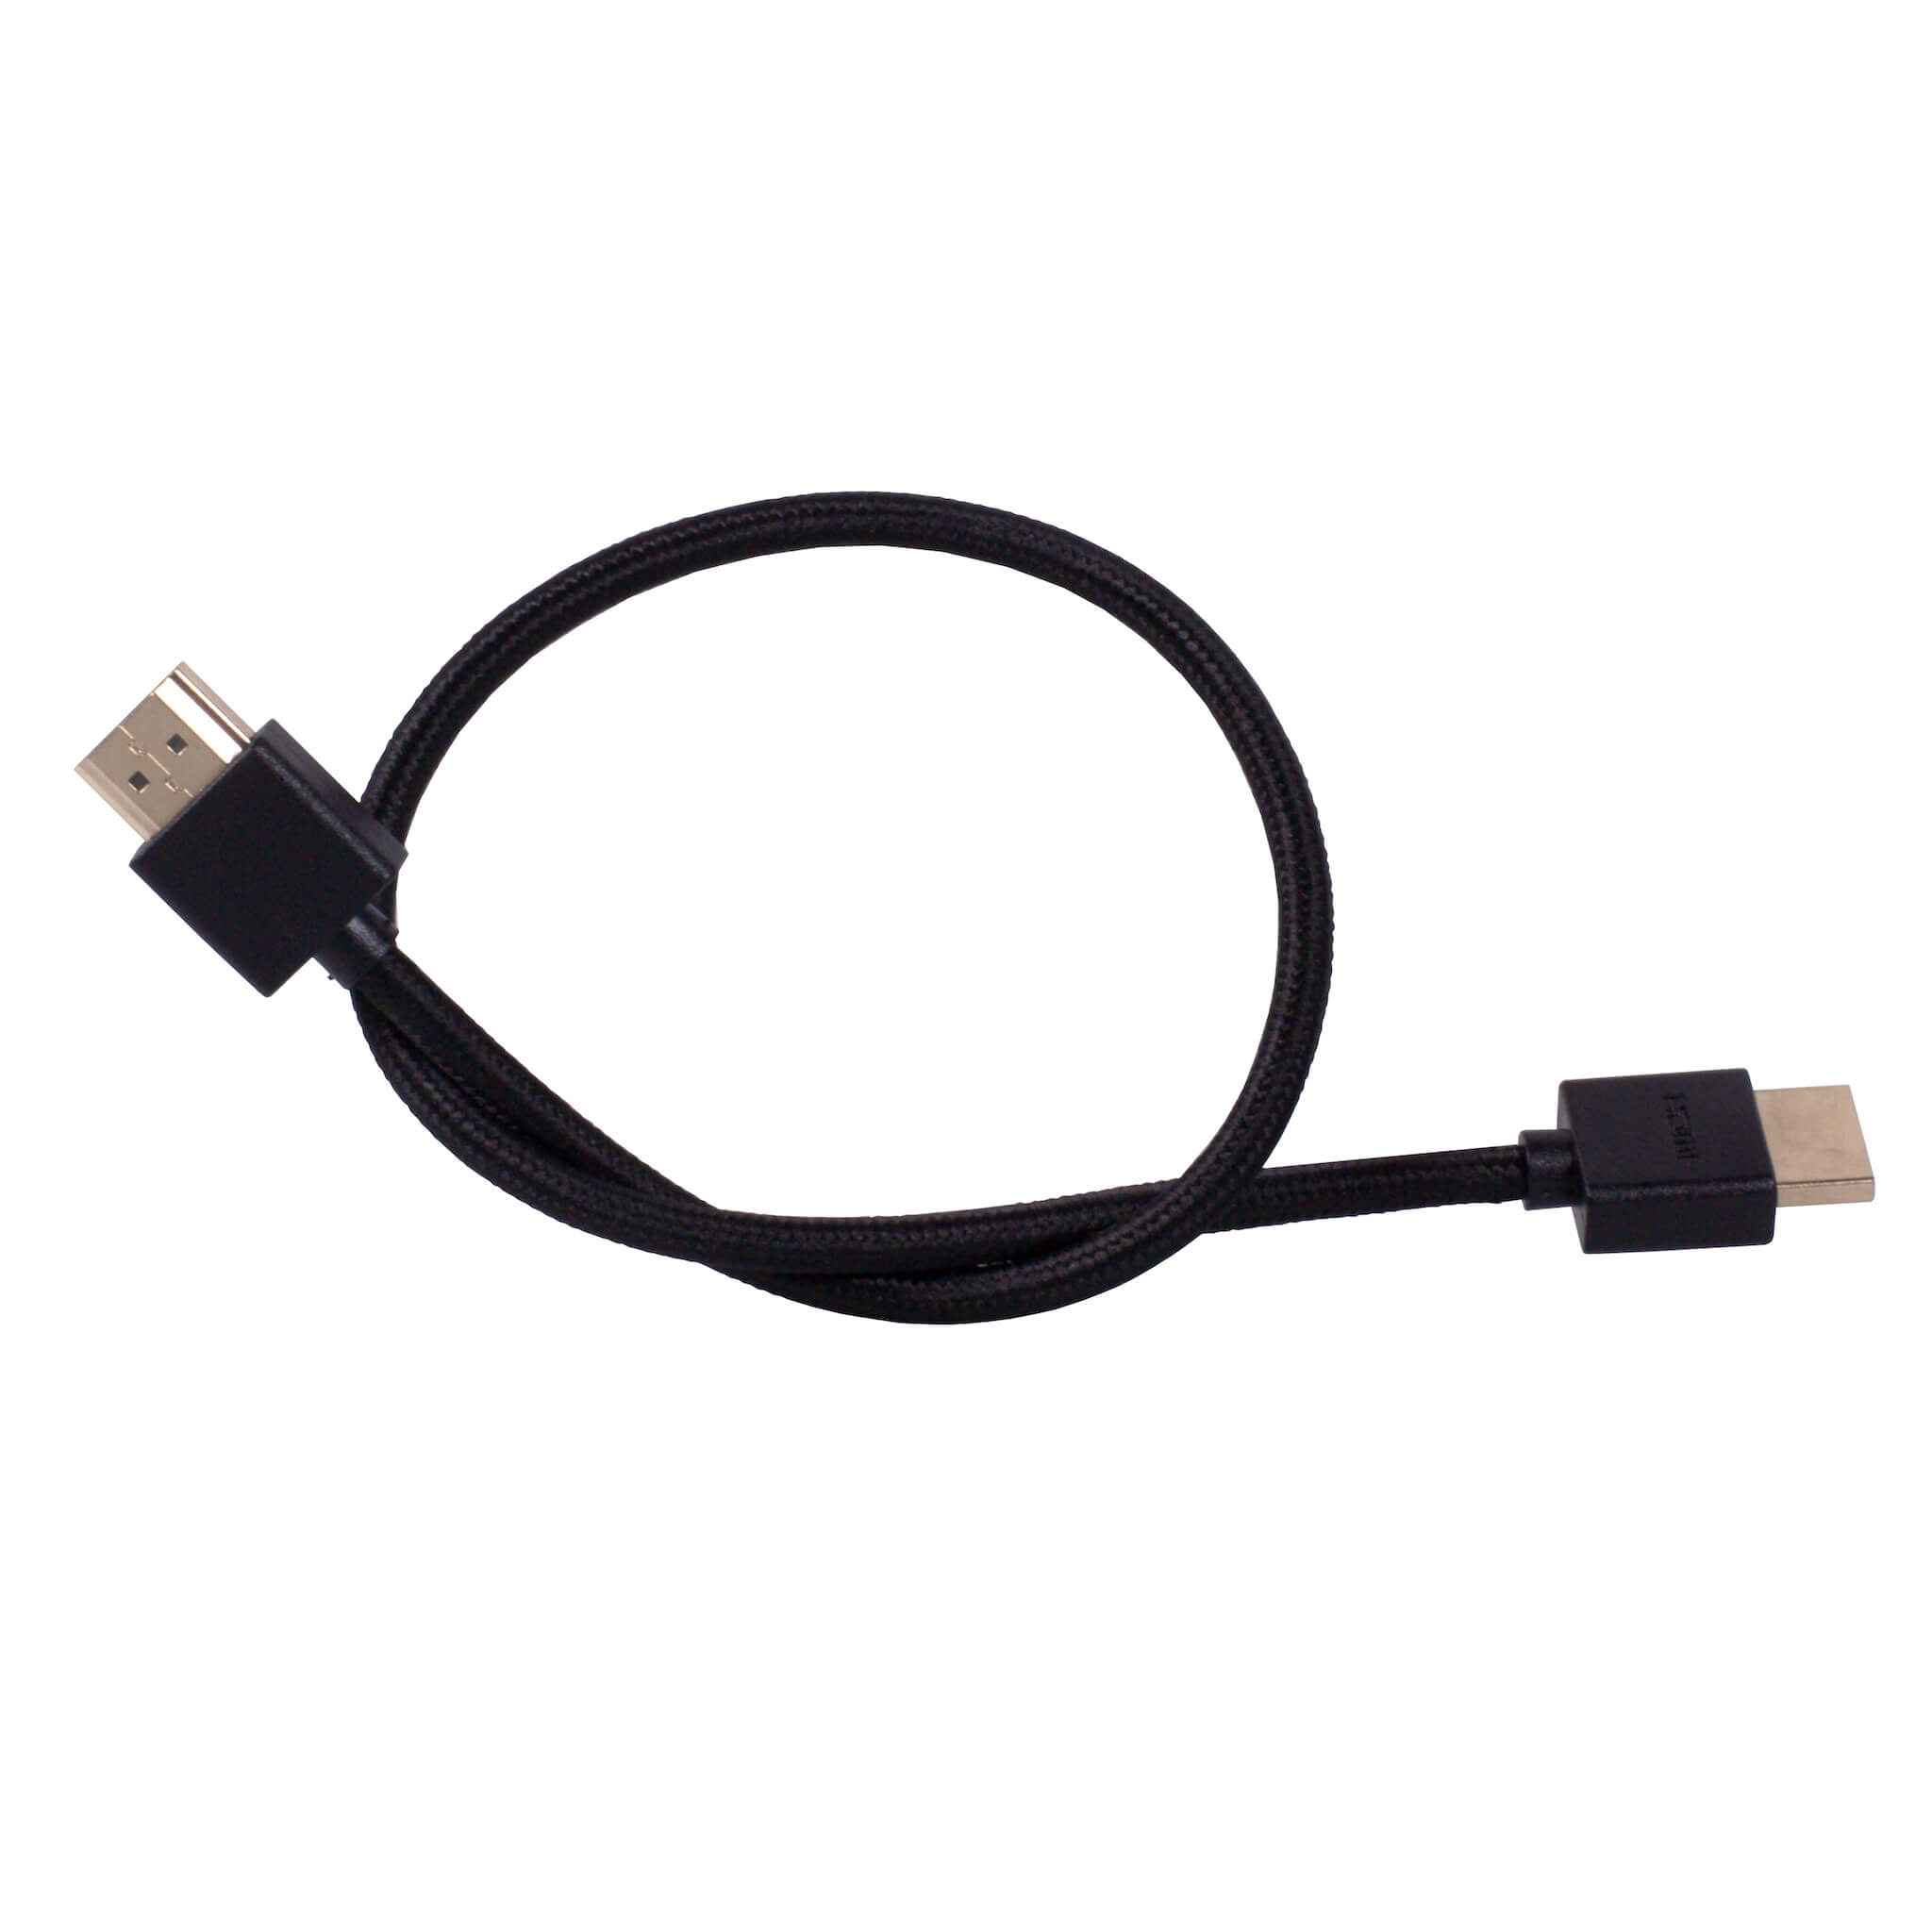 Blackhawk Cables - HDMI to HDMI Thin Braided Cable, 16-inch